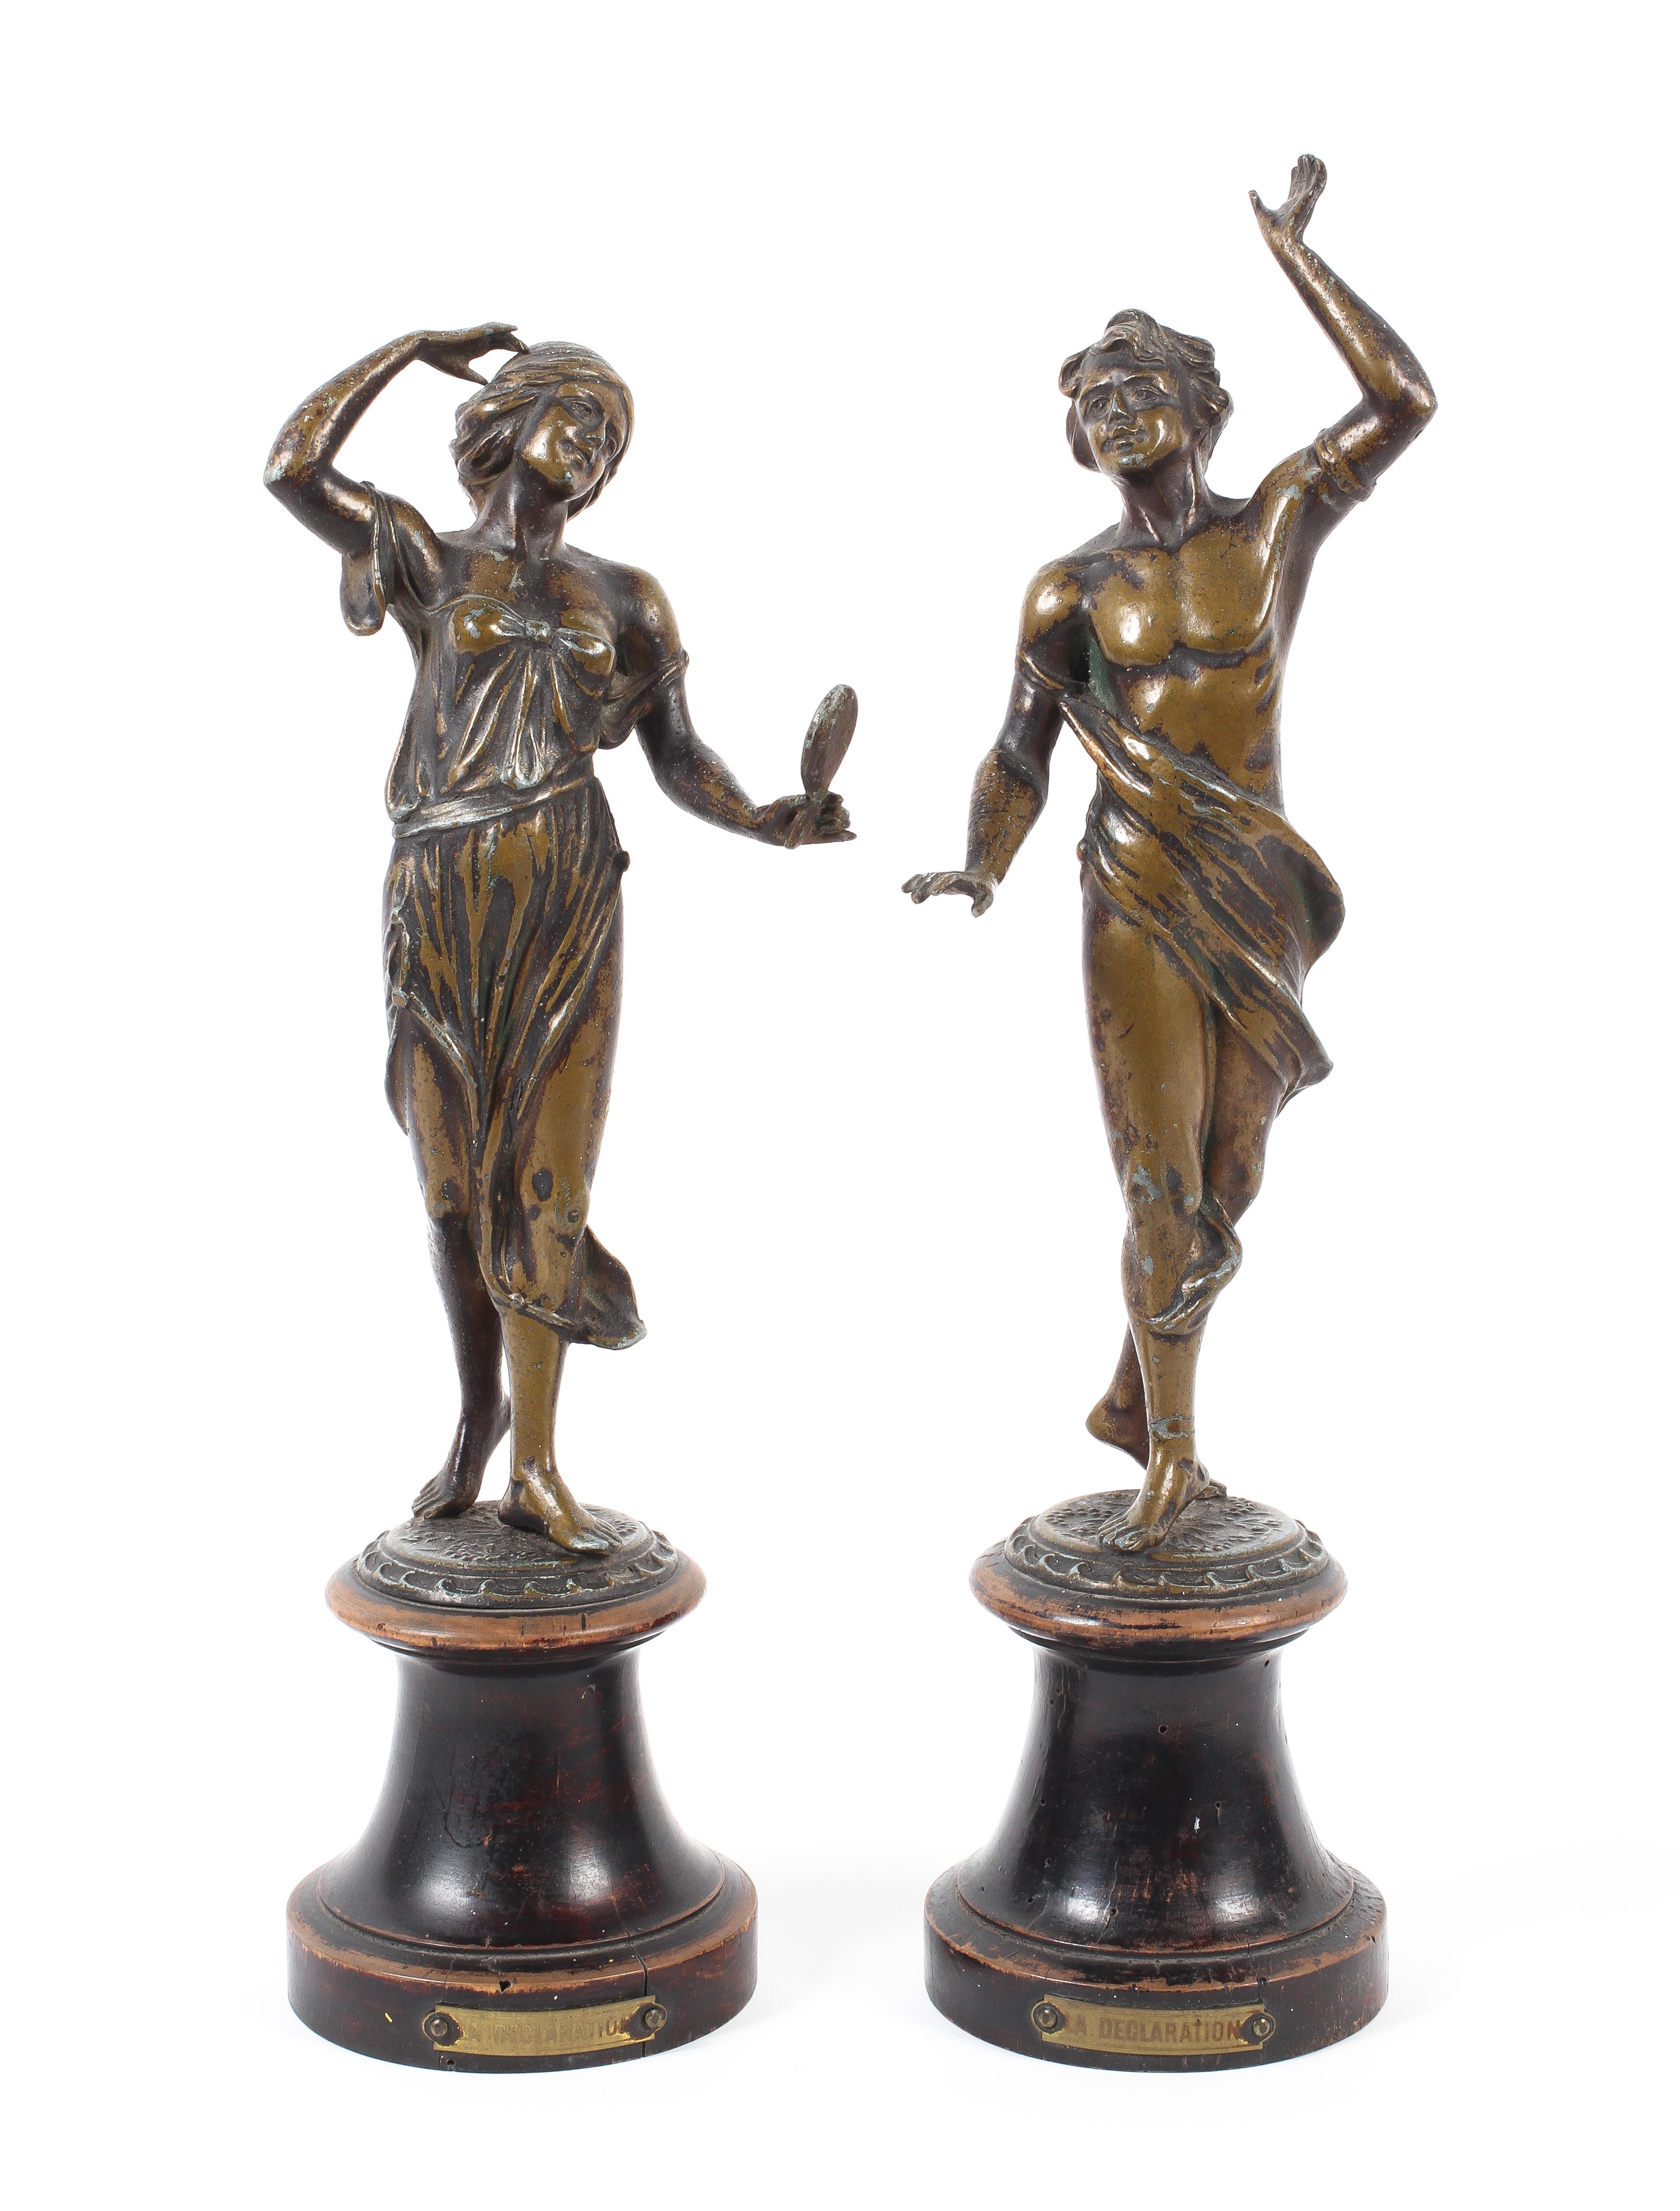 A pair of French late 19th century bronzed spelter figures titled La Declaration.